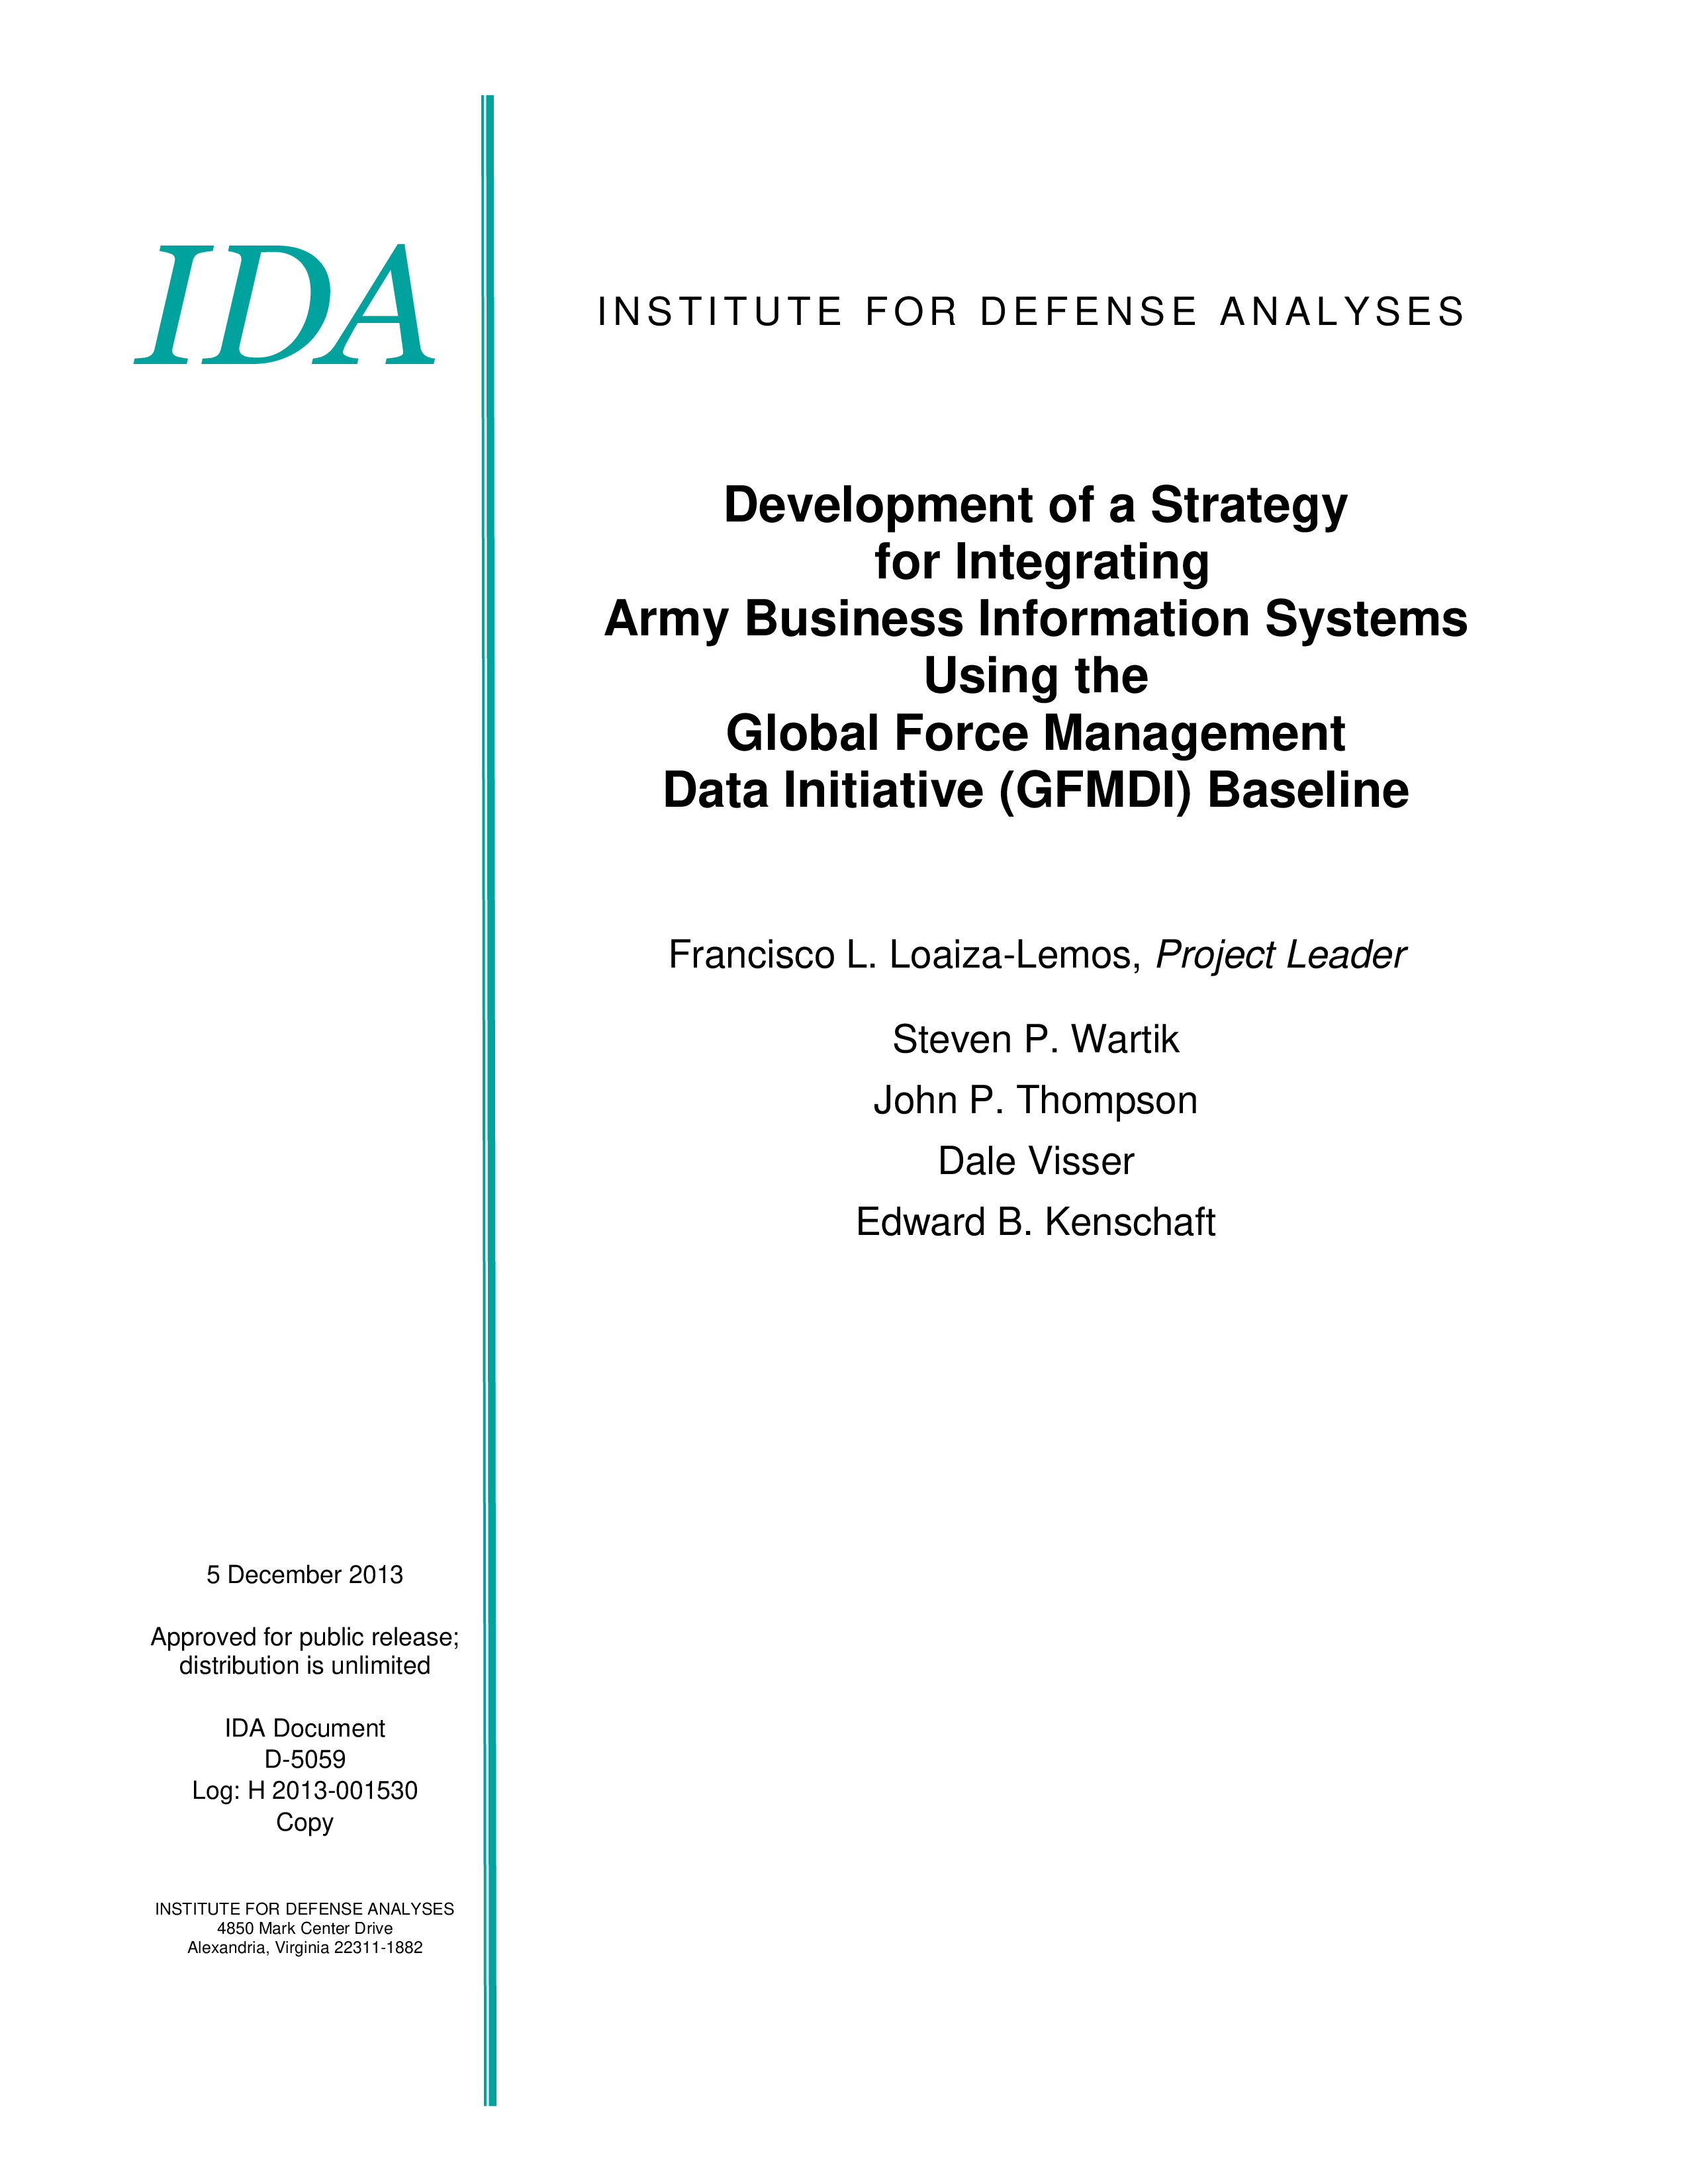 Development of a Strategy for Integrating Army Business Information Systems Using the Global Force Management Data Initiative (GFMDI) Baseline